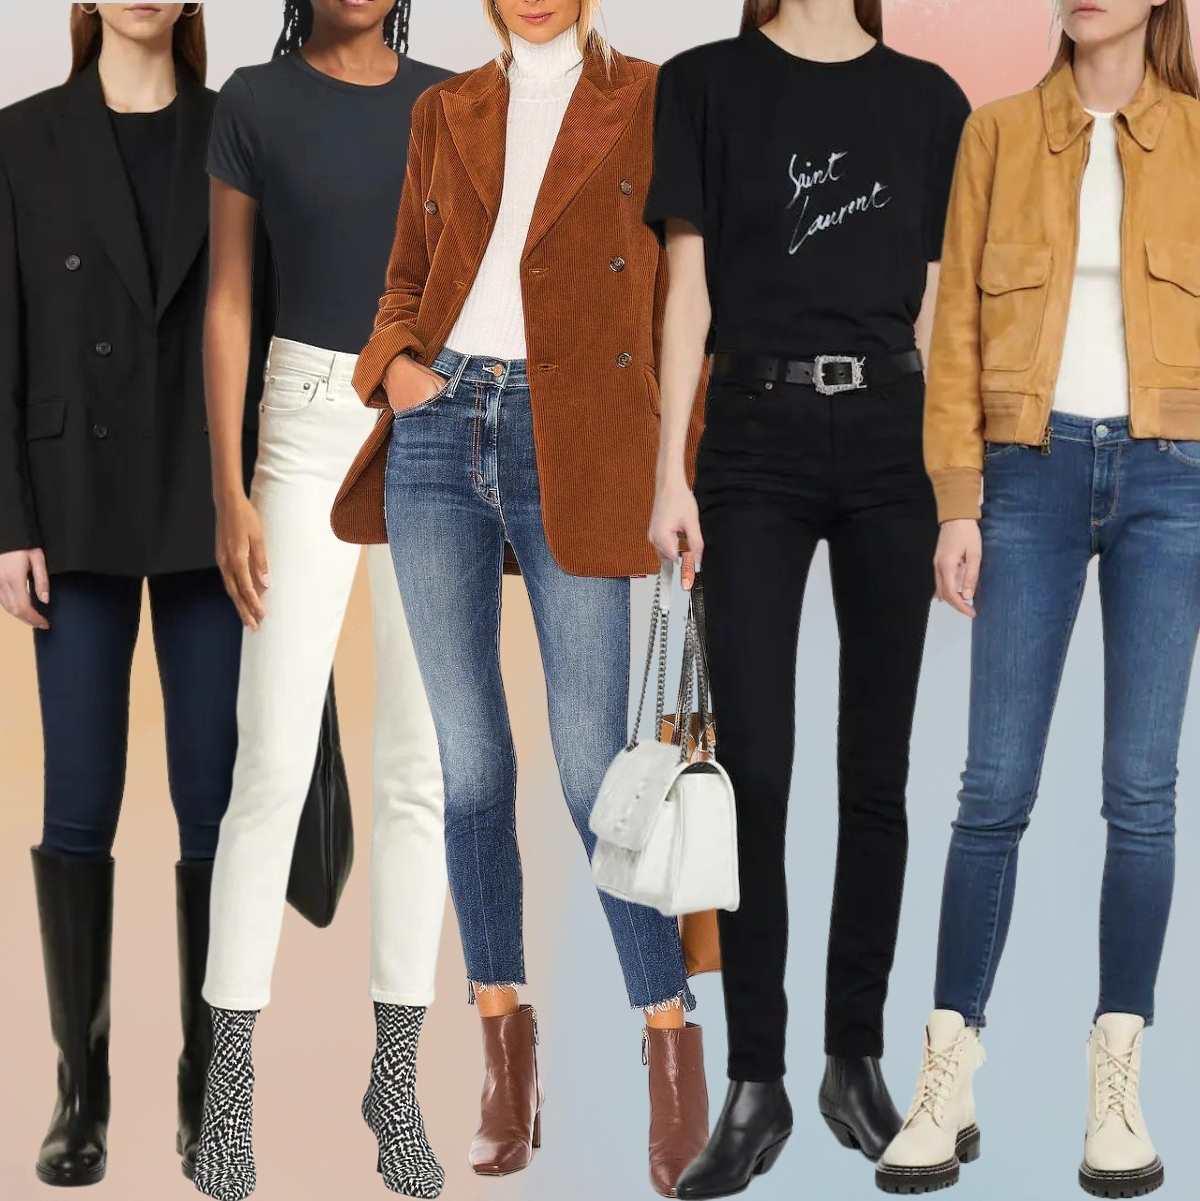 Collage of 4 women wearing different knee high boots with skinny jeans.